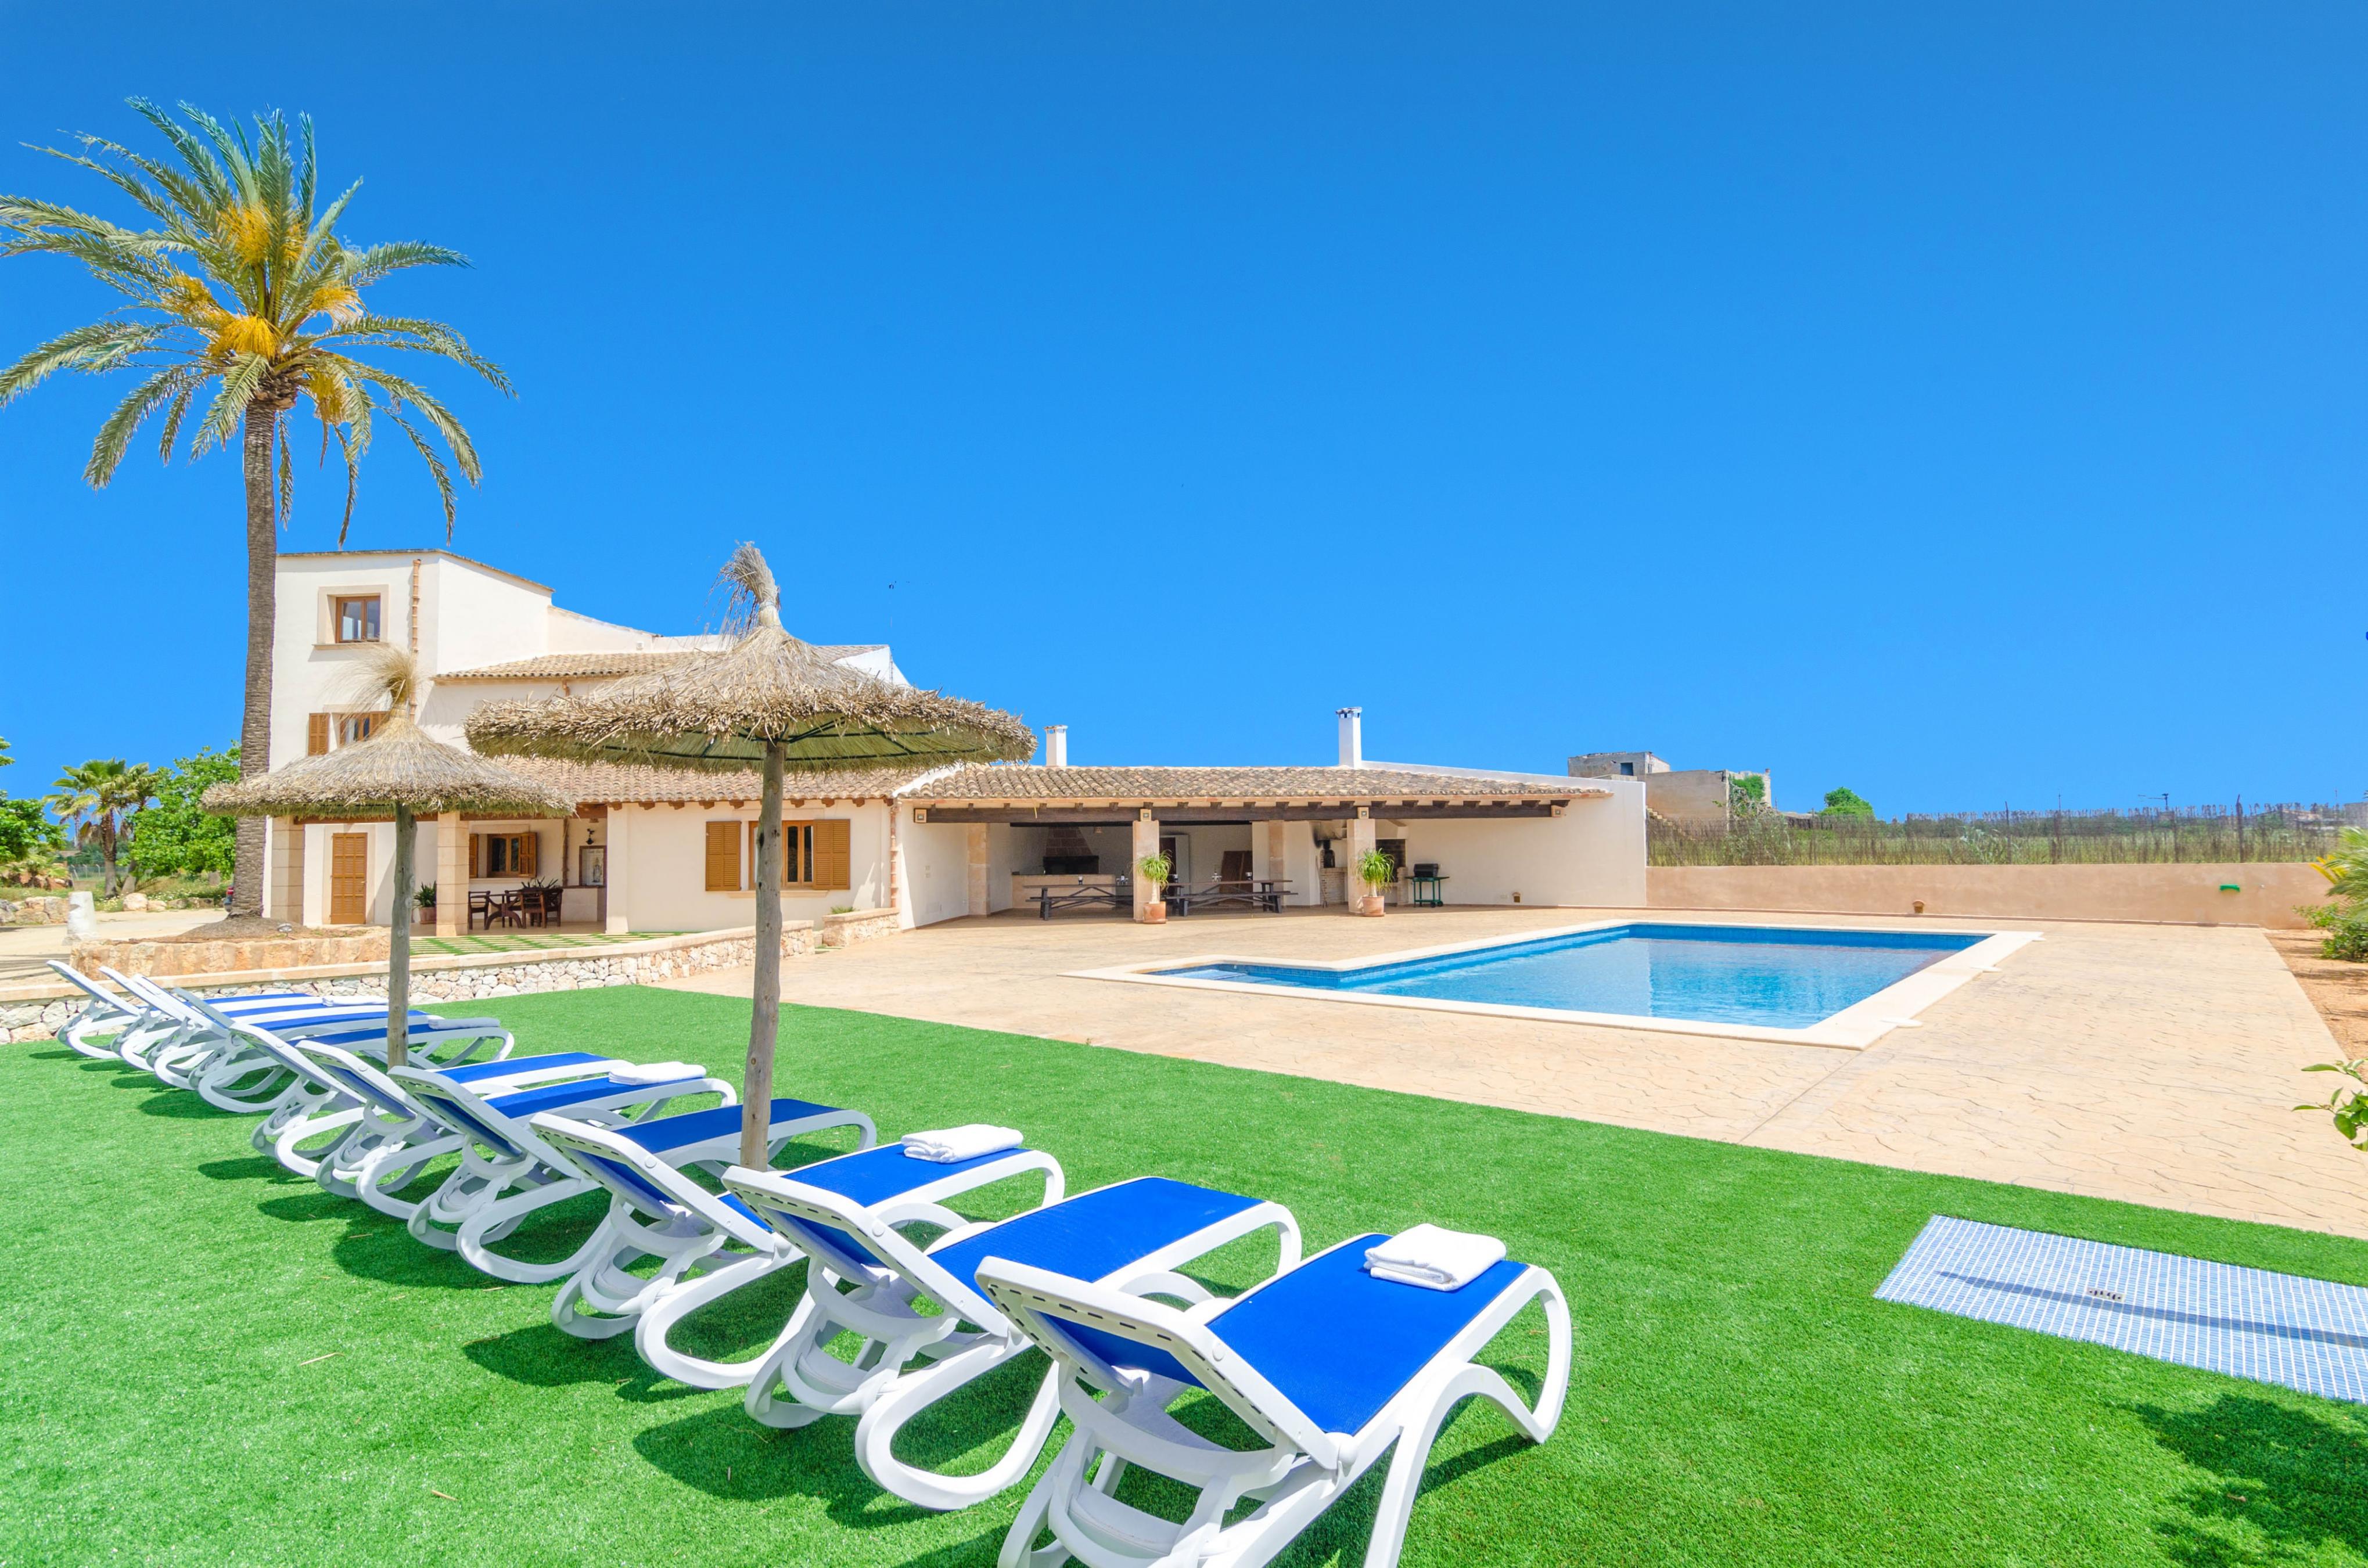 Property Image 1 - FINCA SANT BLAI NOU - Beautiful villa with private pool in a quiet area. Free WiFi